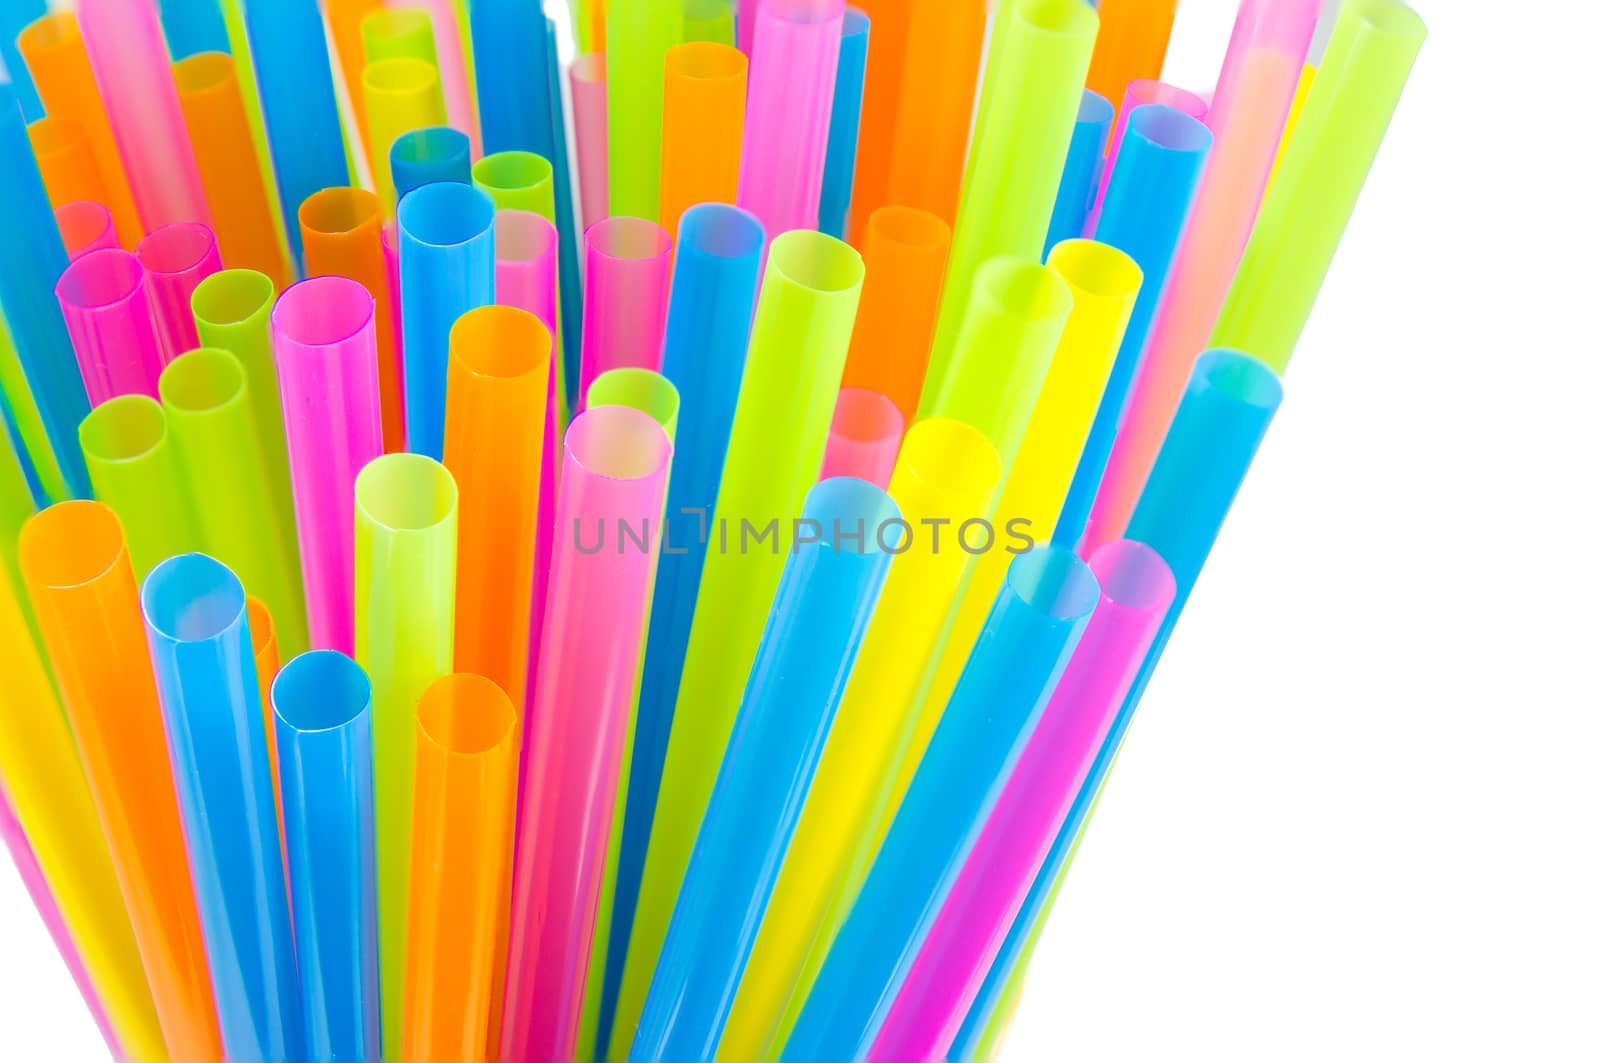 Closeup view of colorful drinking straws isolated on white background